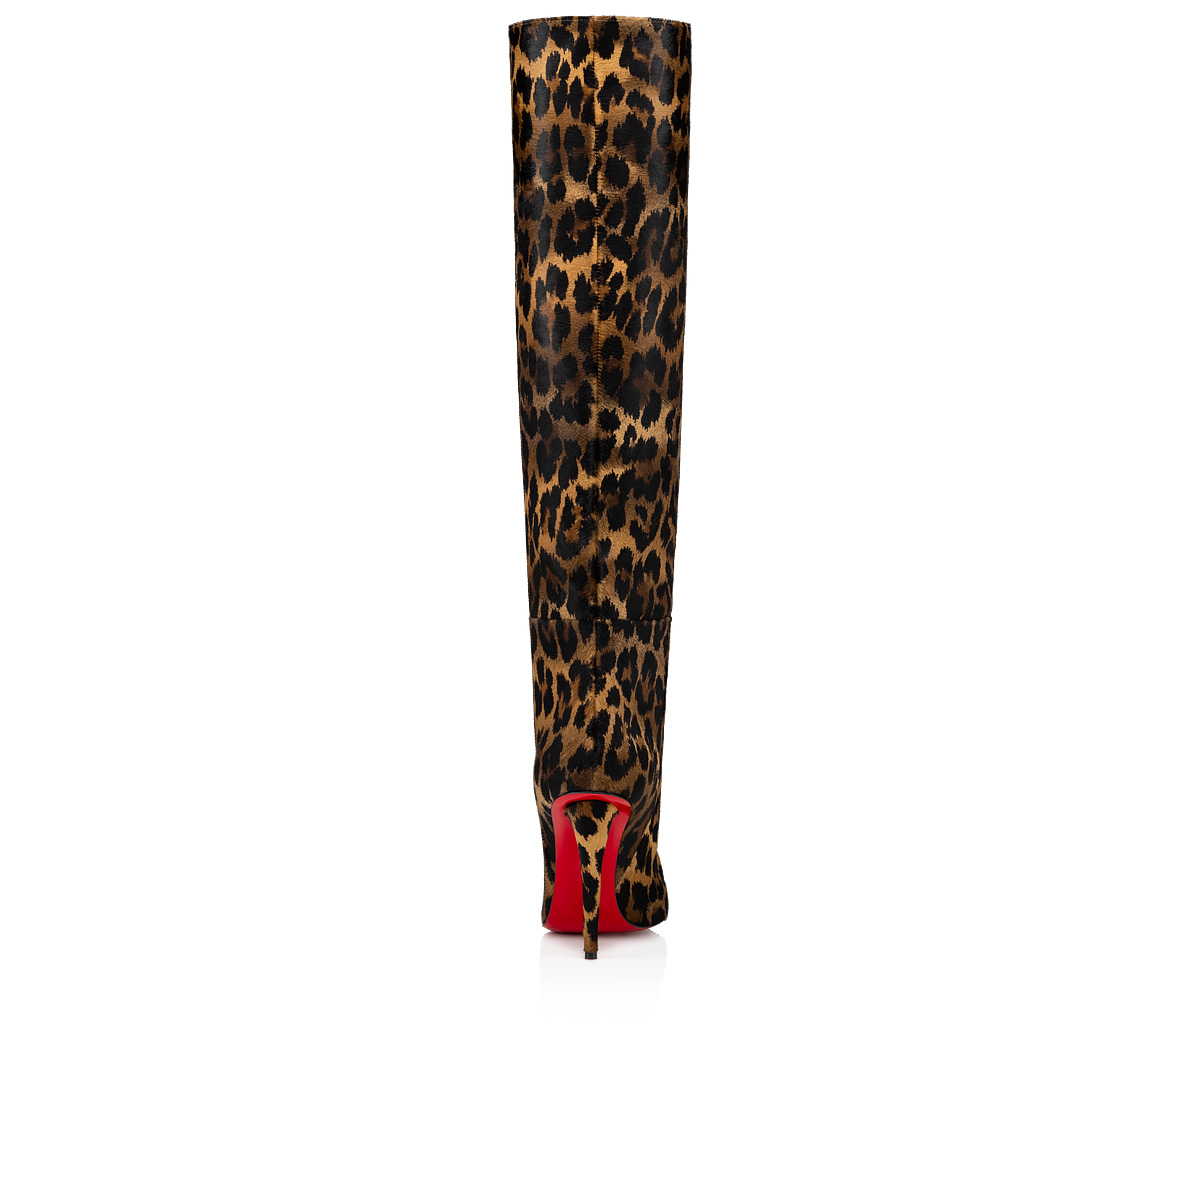 Astrilarge Botta Red Sole Leopard Suede Knee-High Boots